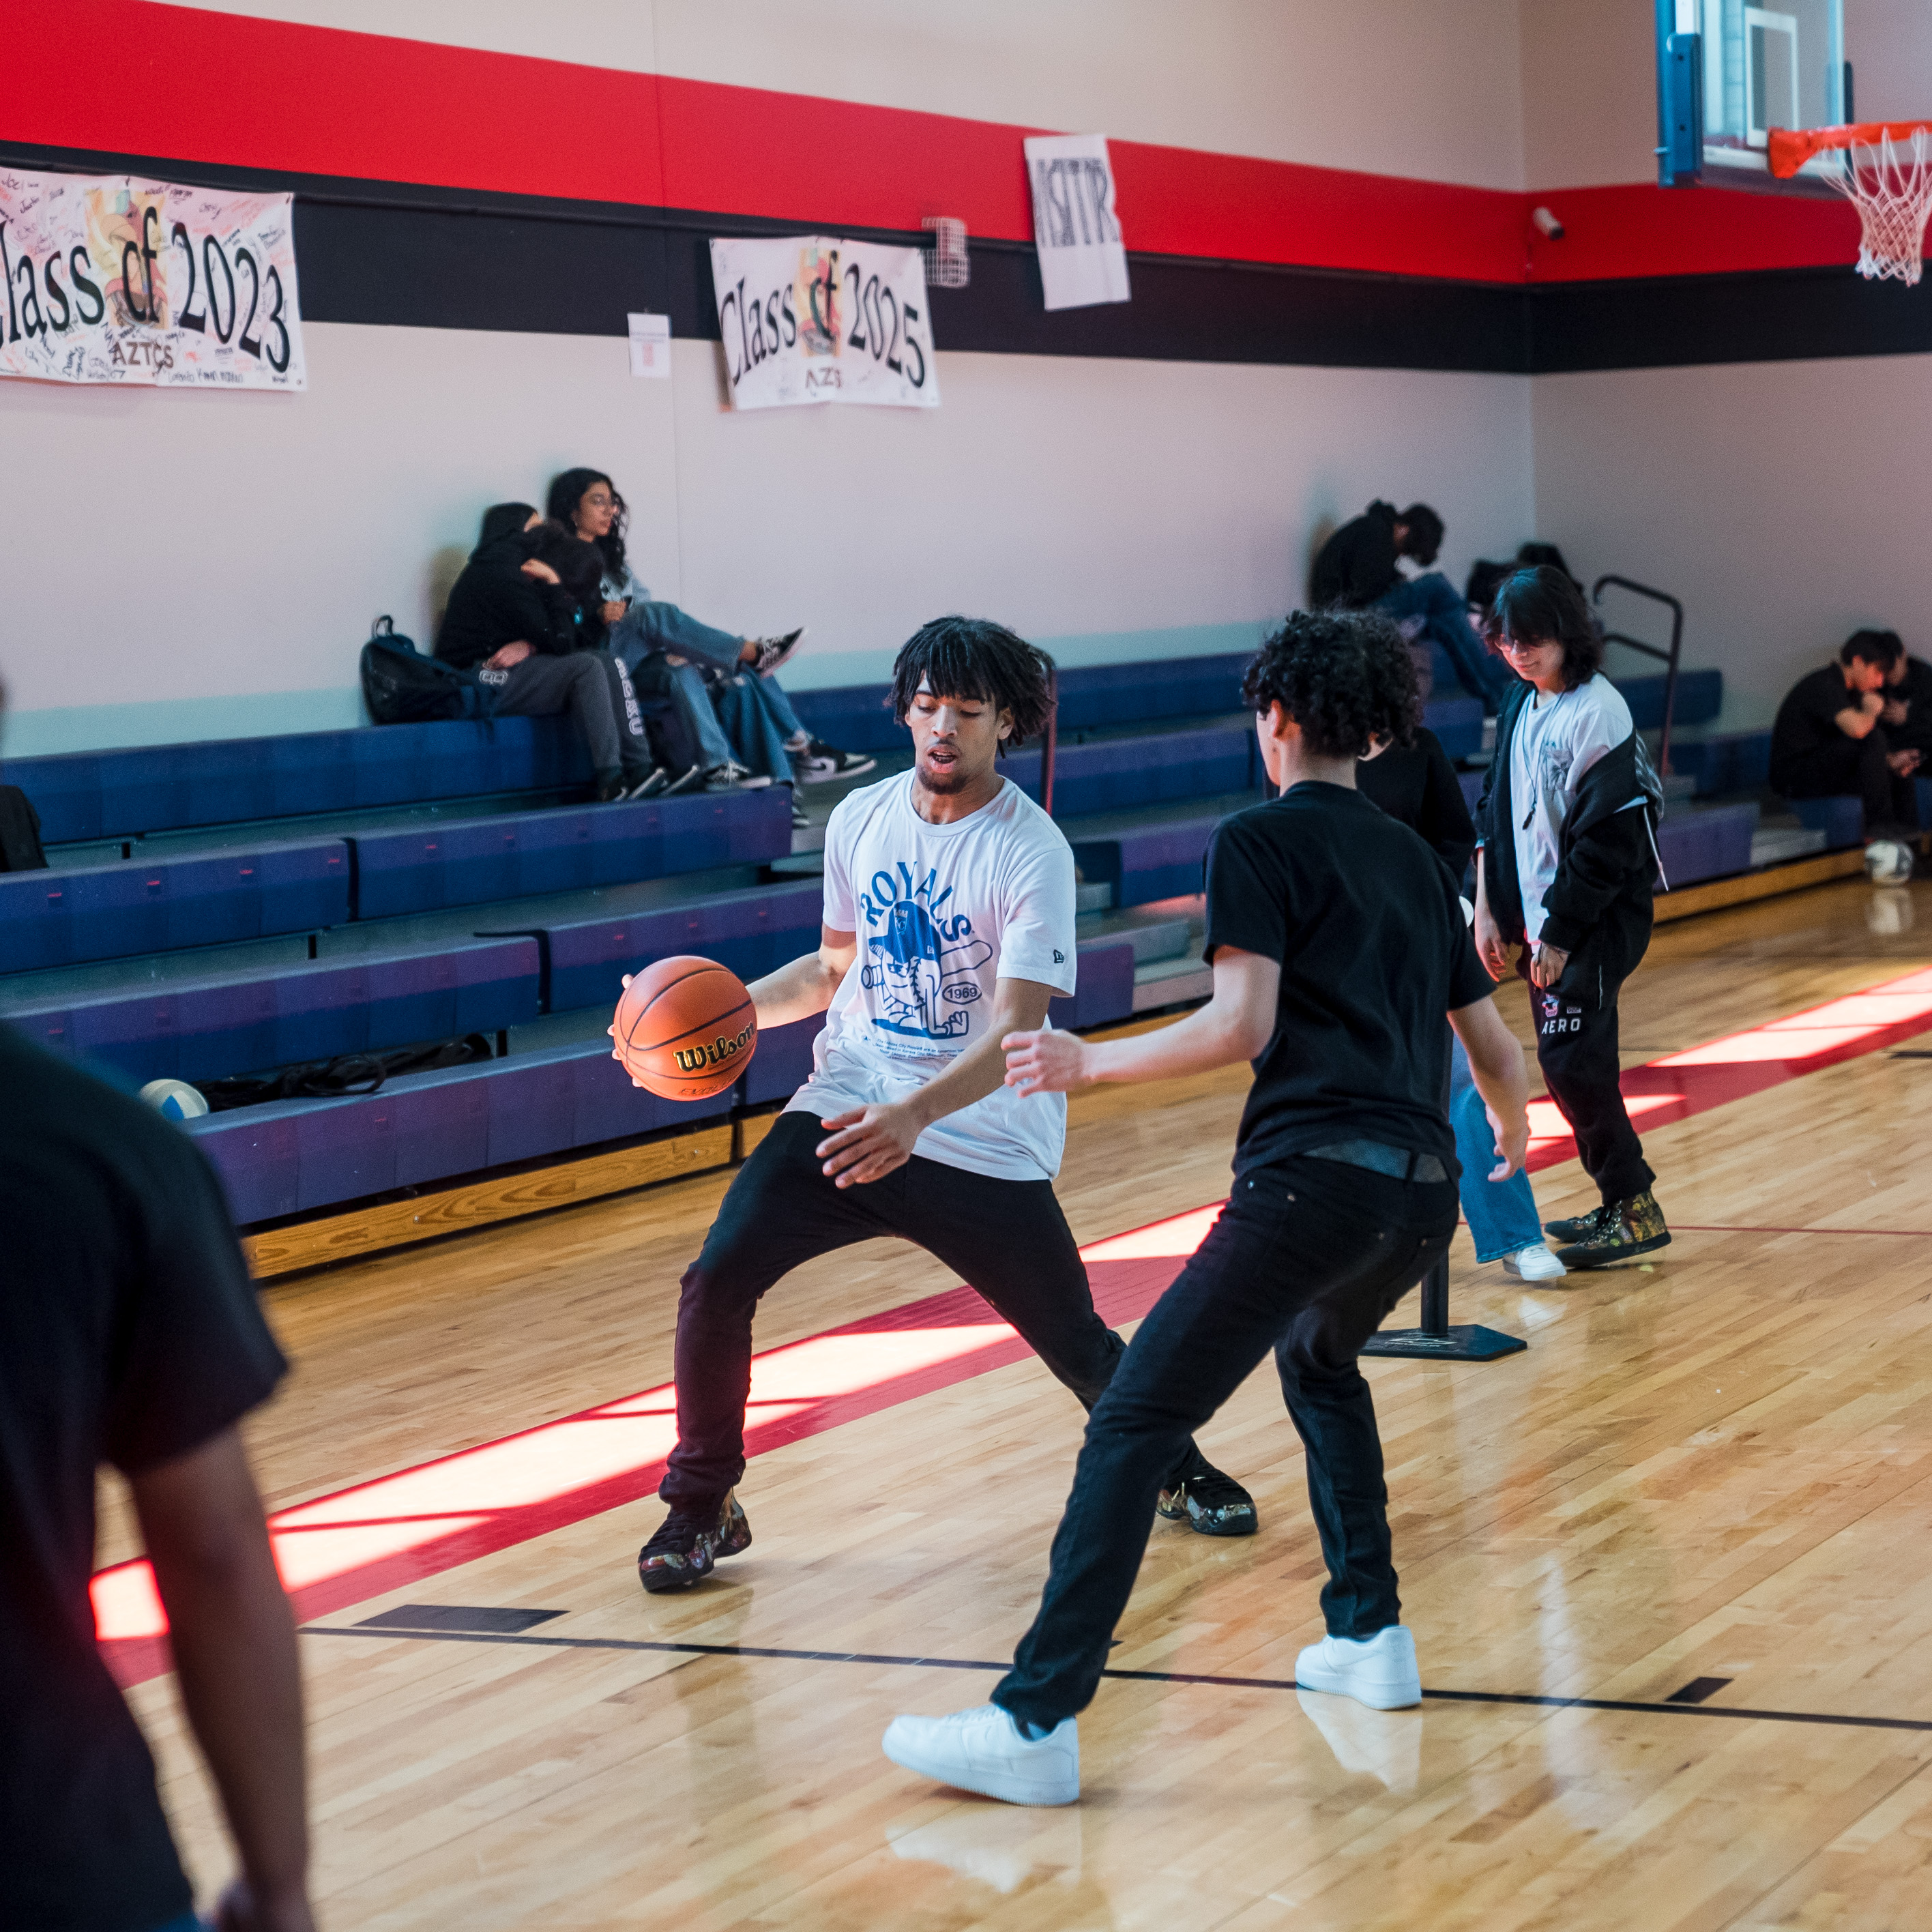 Students playing basketball in the high school gym